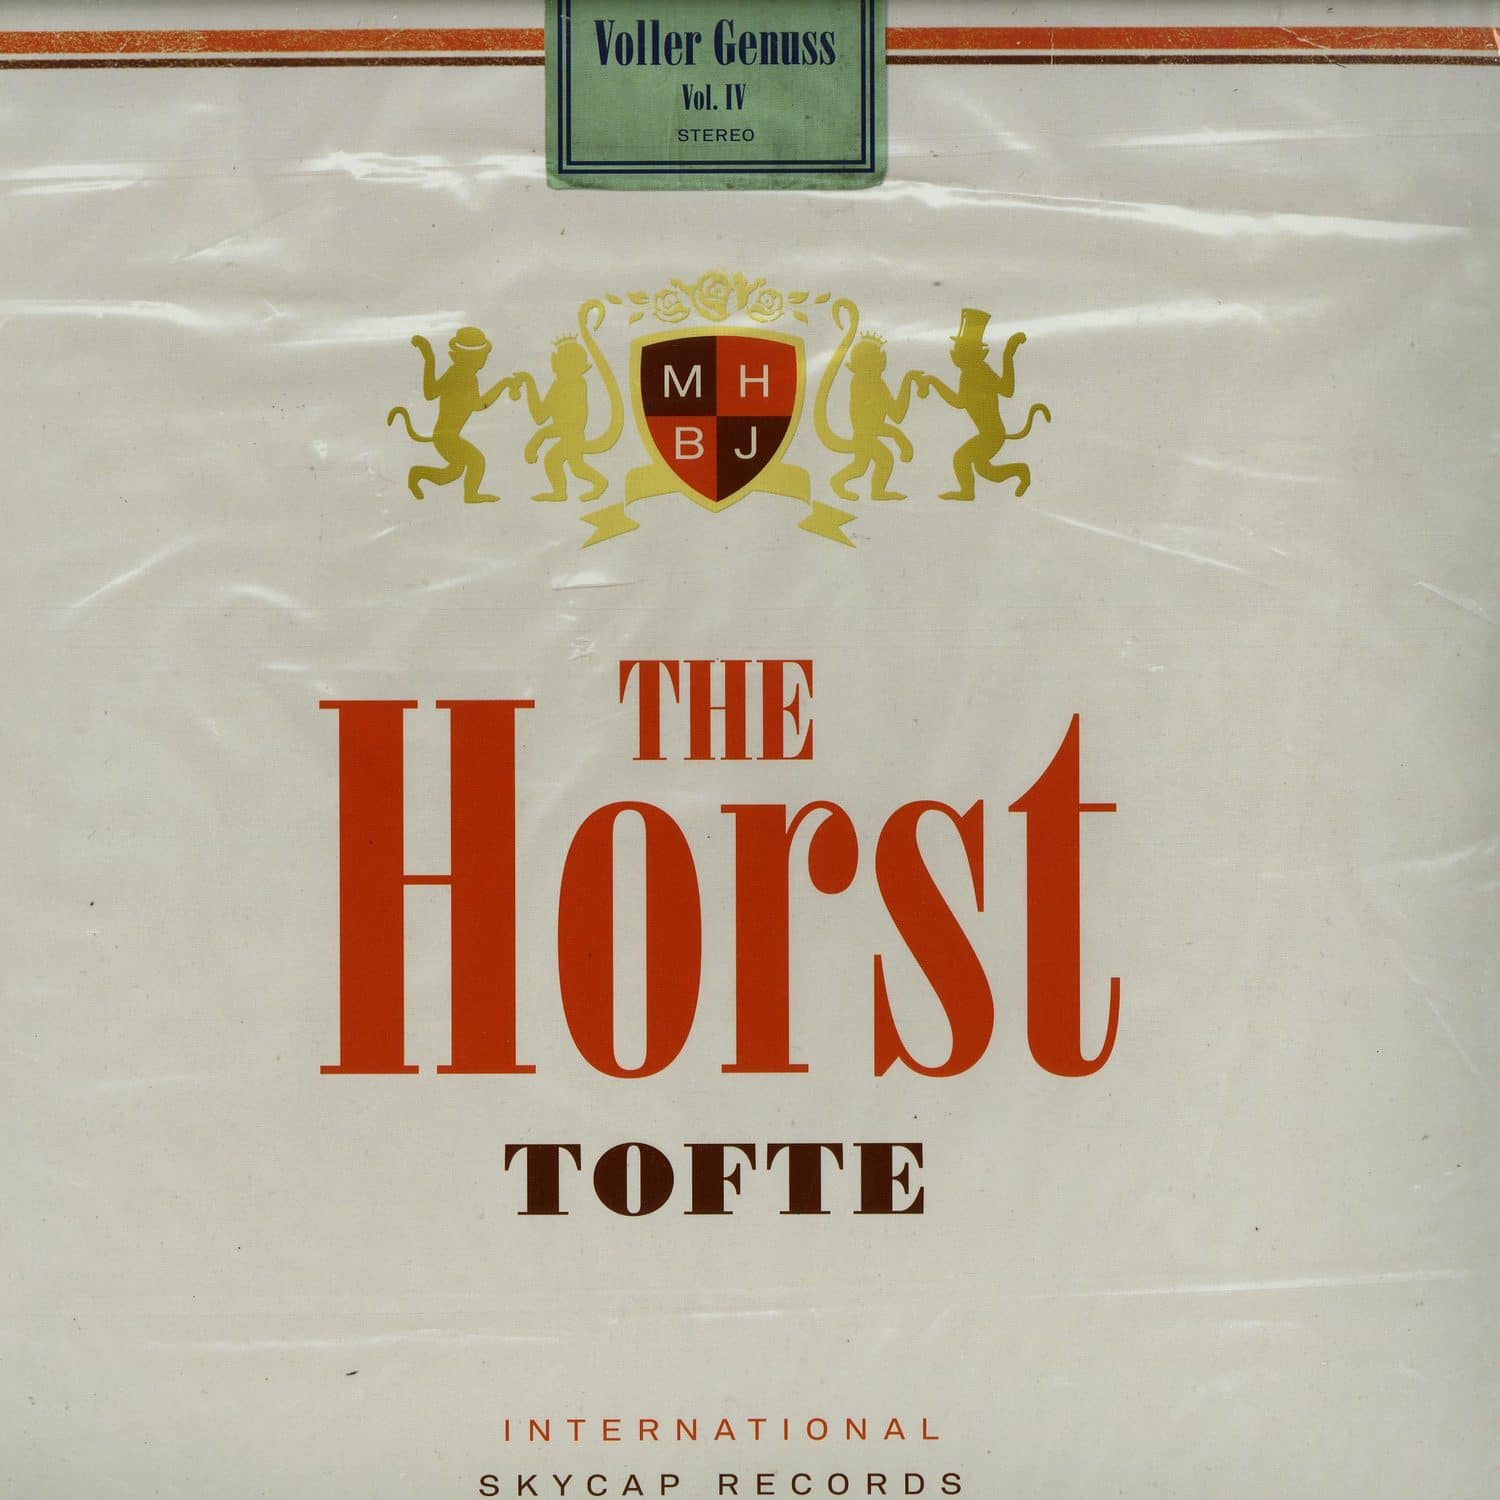 The Horst - TOFTE 